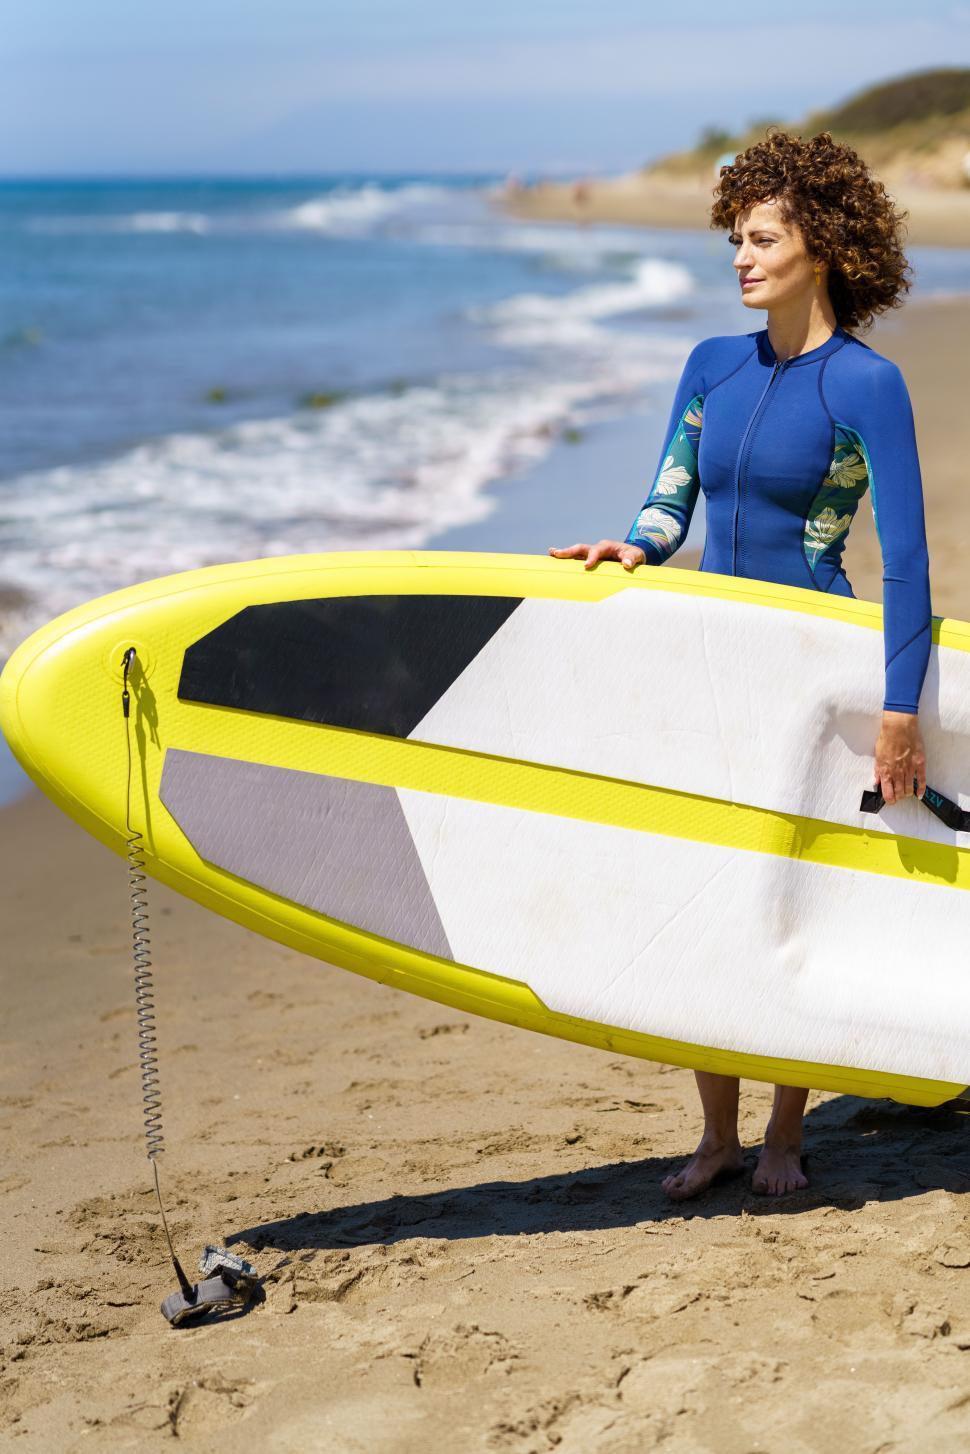 Free Image of Young woman standing with SUP board on sandy beach 